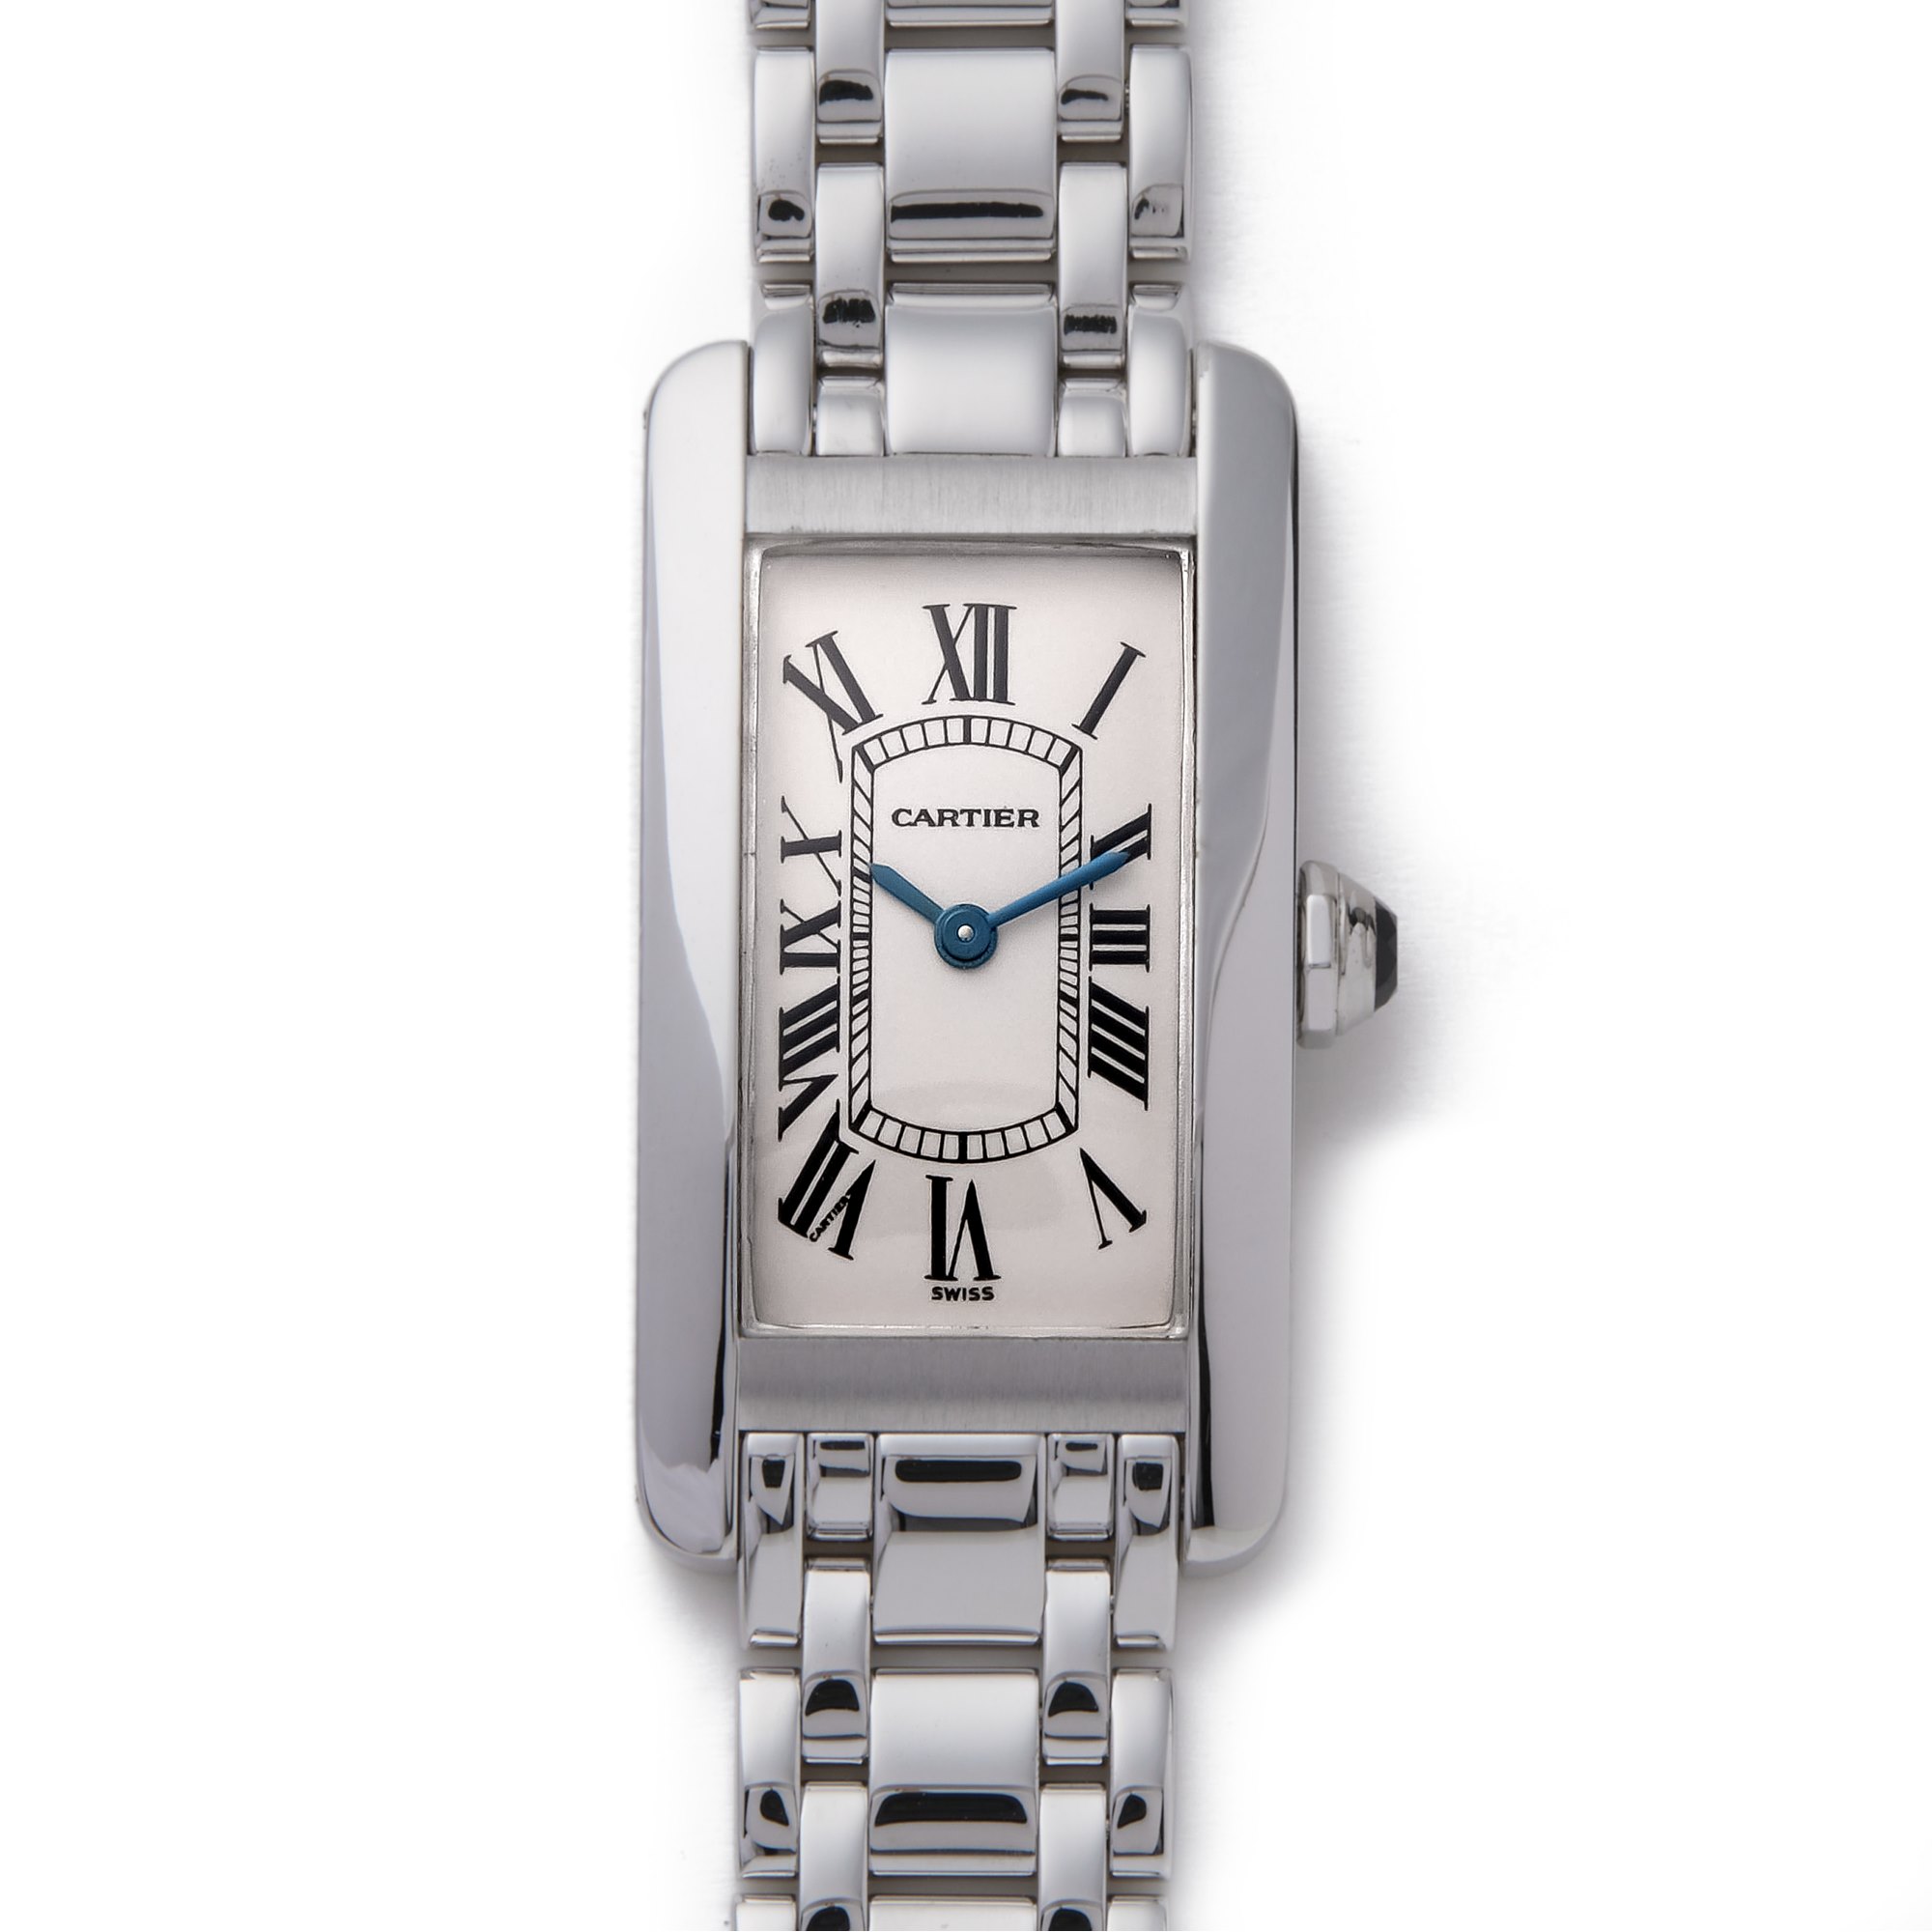 Cartier Tank Americaine 18K White Gold W26019L1 or 1713